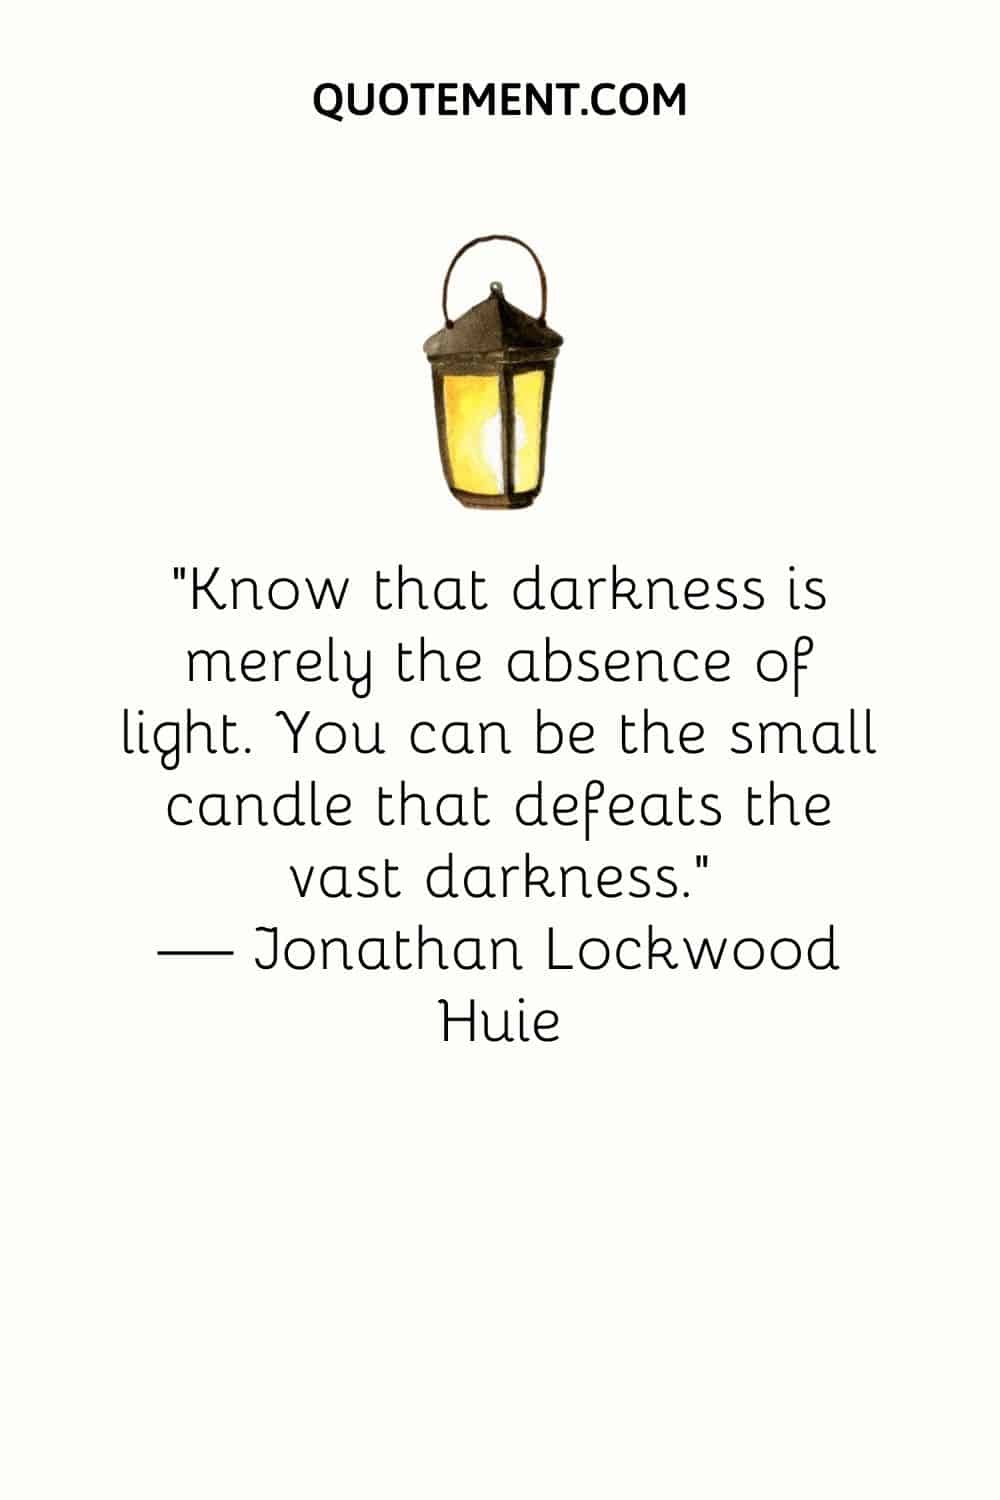 “Know that darkness is merely the absence of light. You can be the small candle that defeats the vast darkness.” — Jonathan Lockwood Huie